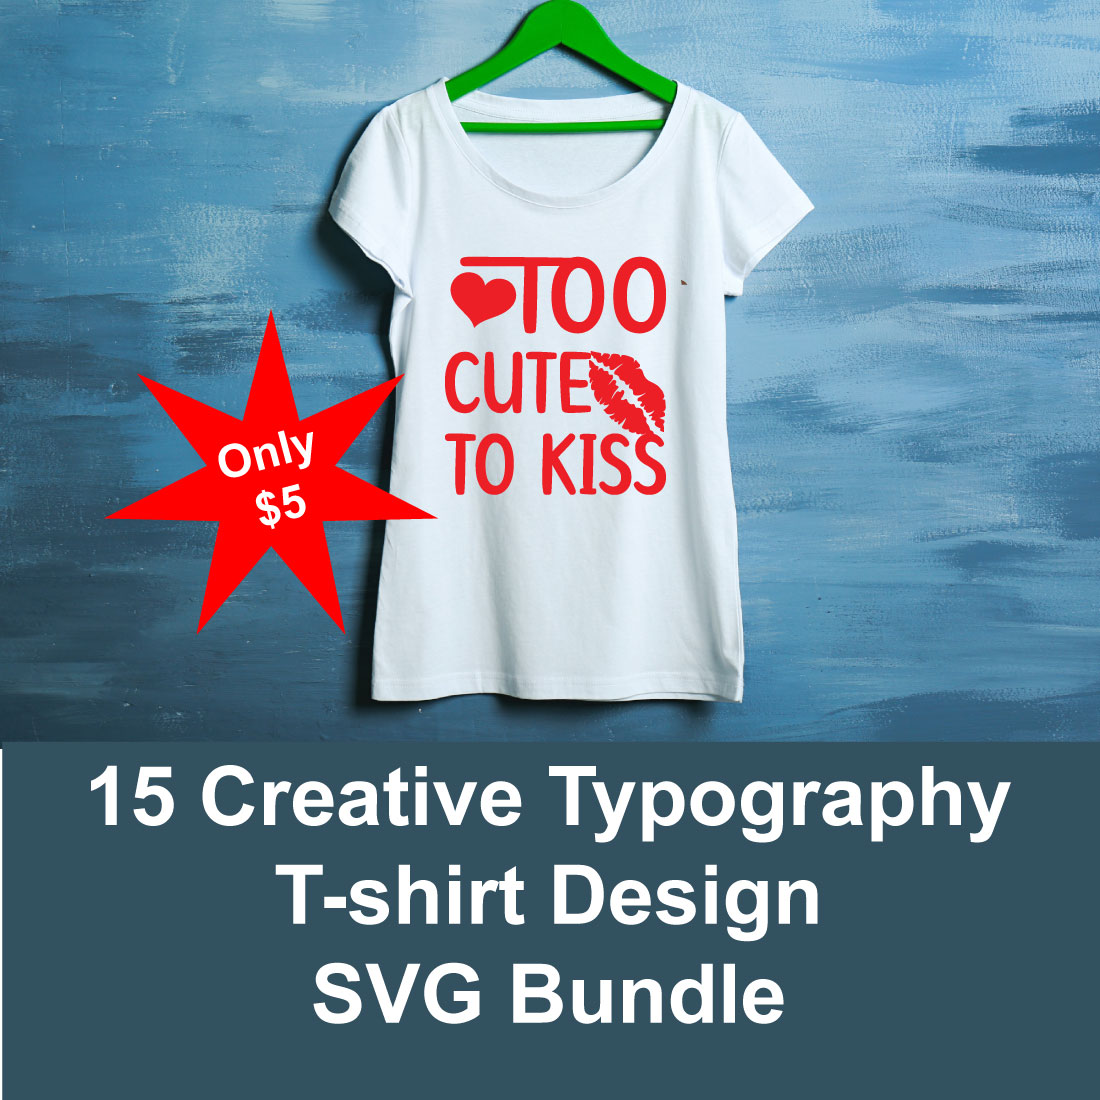 16 Creative Typography T-shirt Designs image preview.